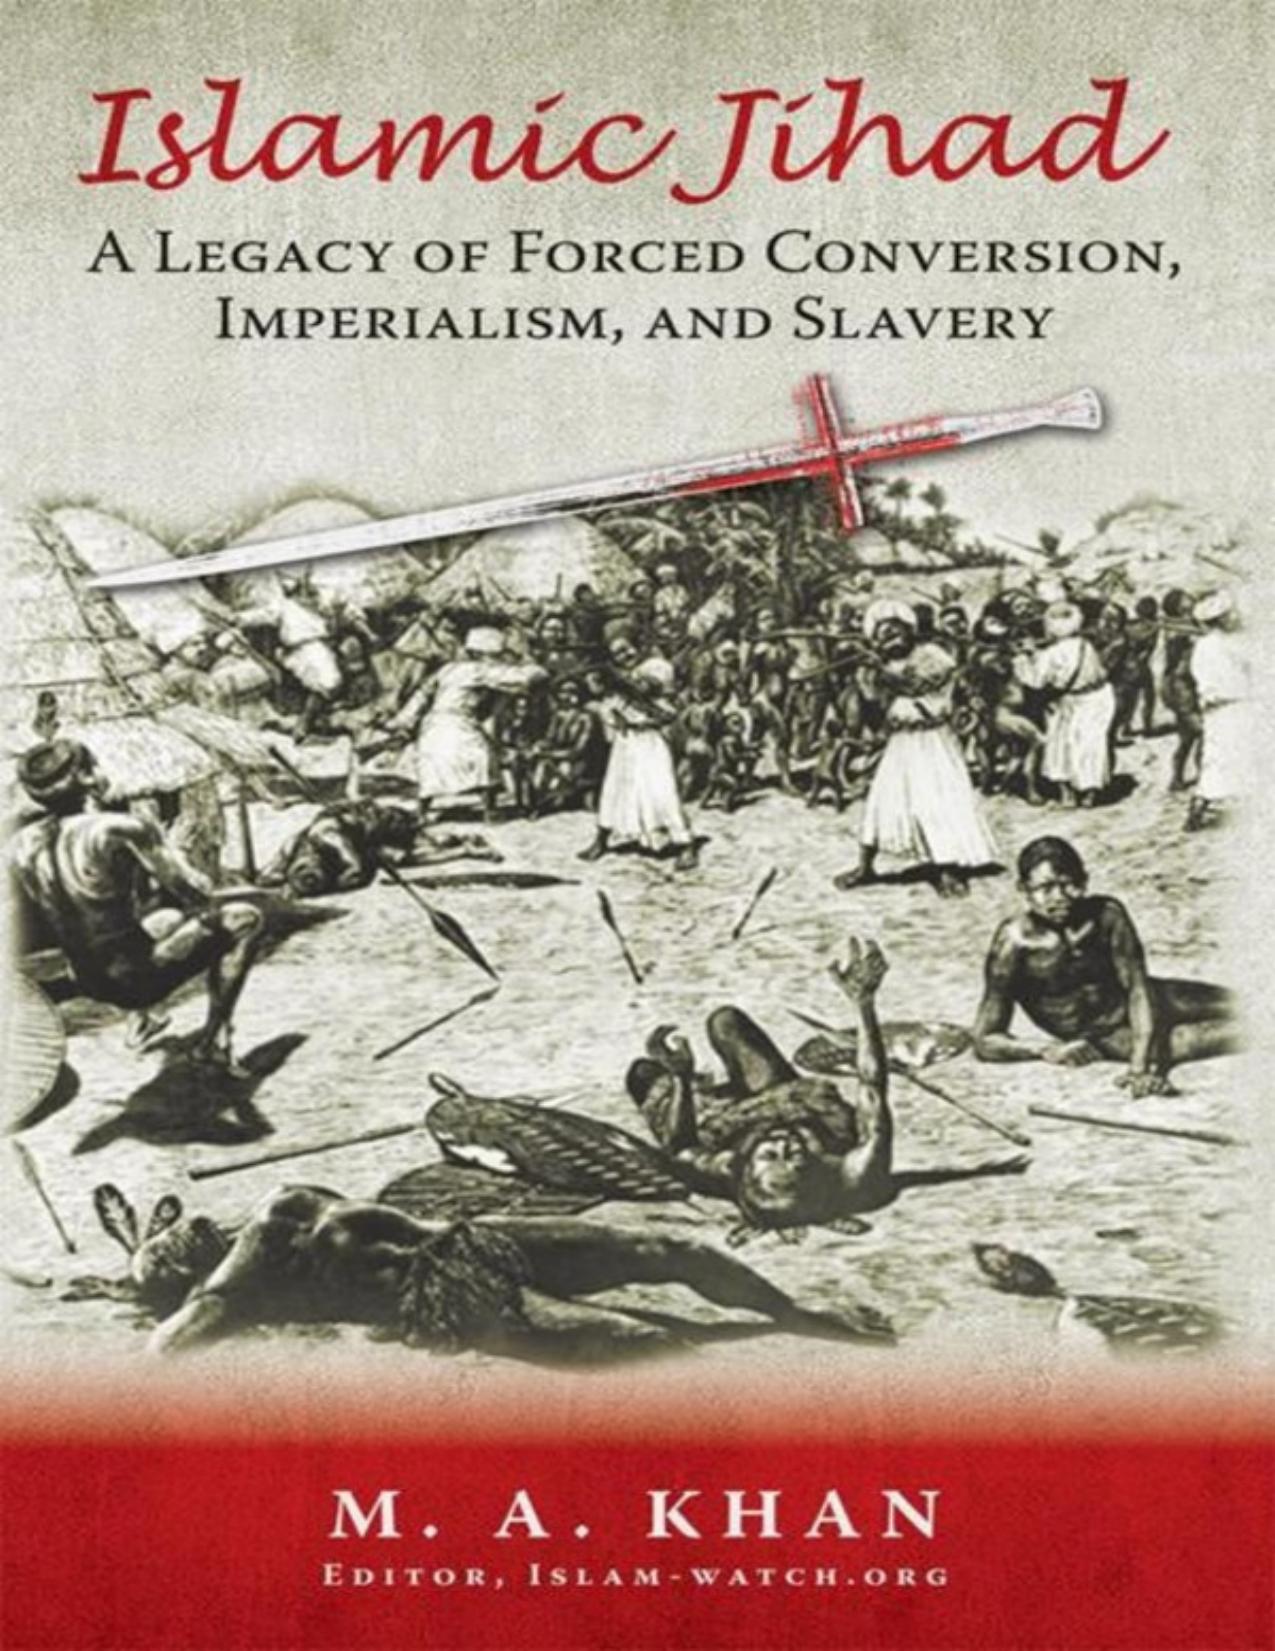 Islamic Jihad: A Legacy of Forced Conversion, Imperialism, and Slavery by M. A. Khan